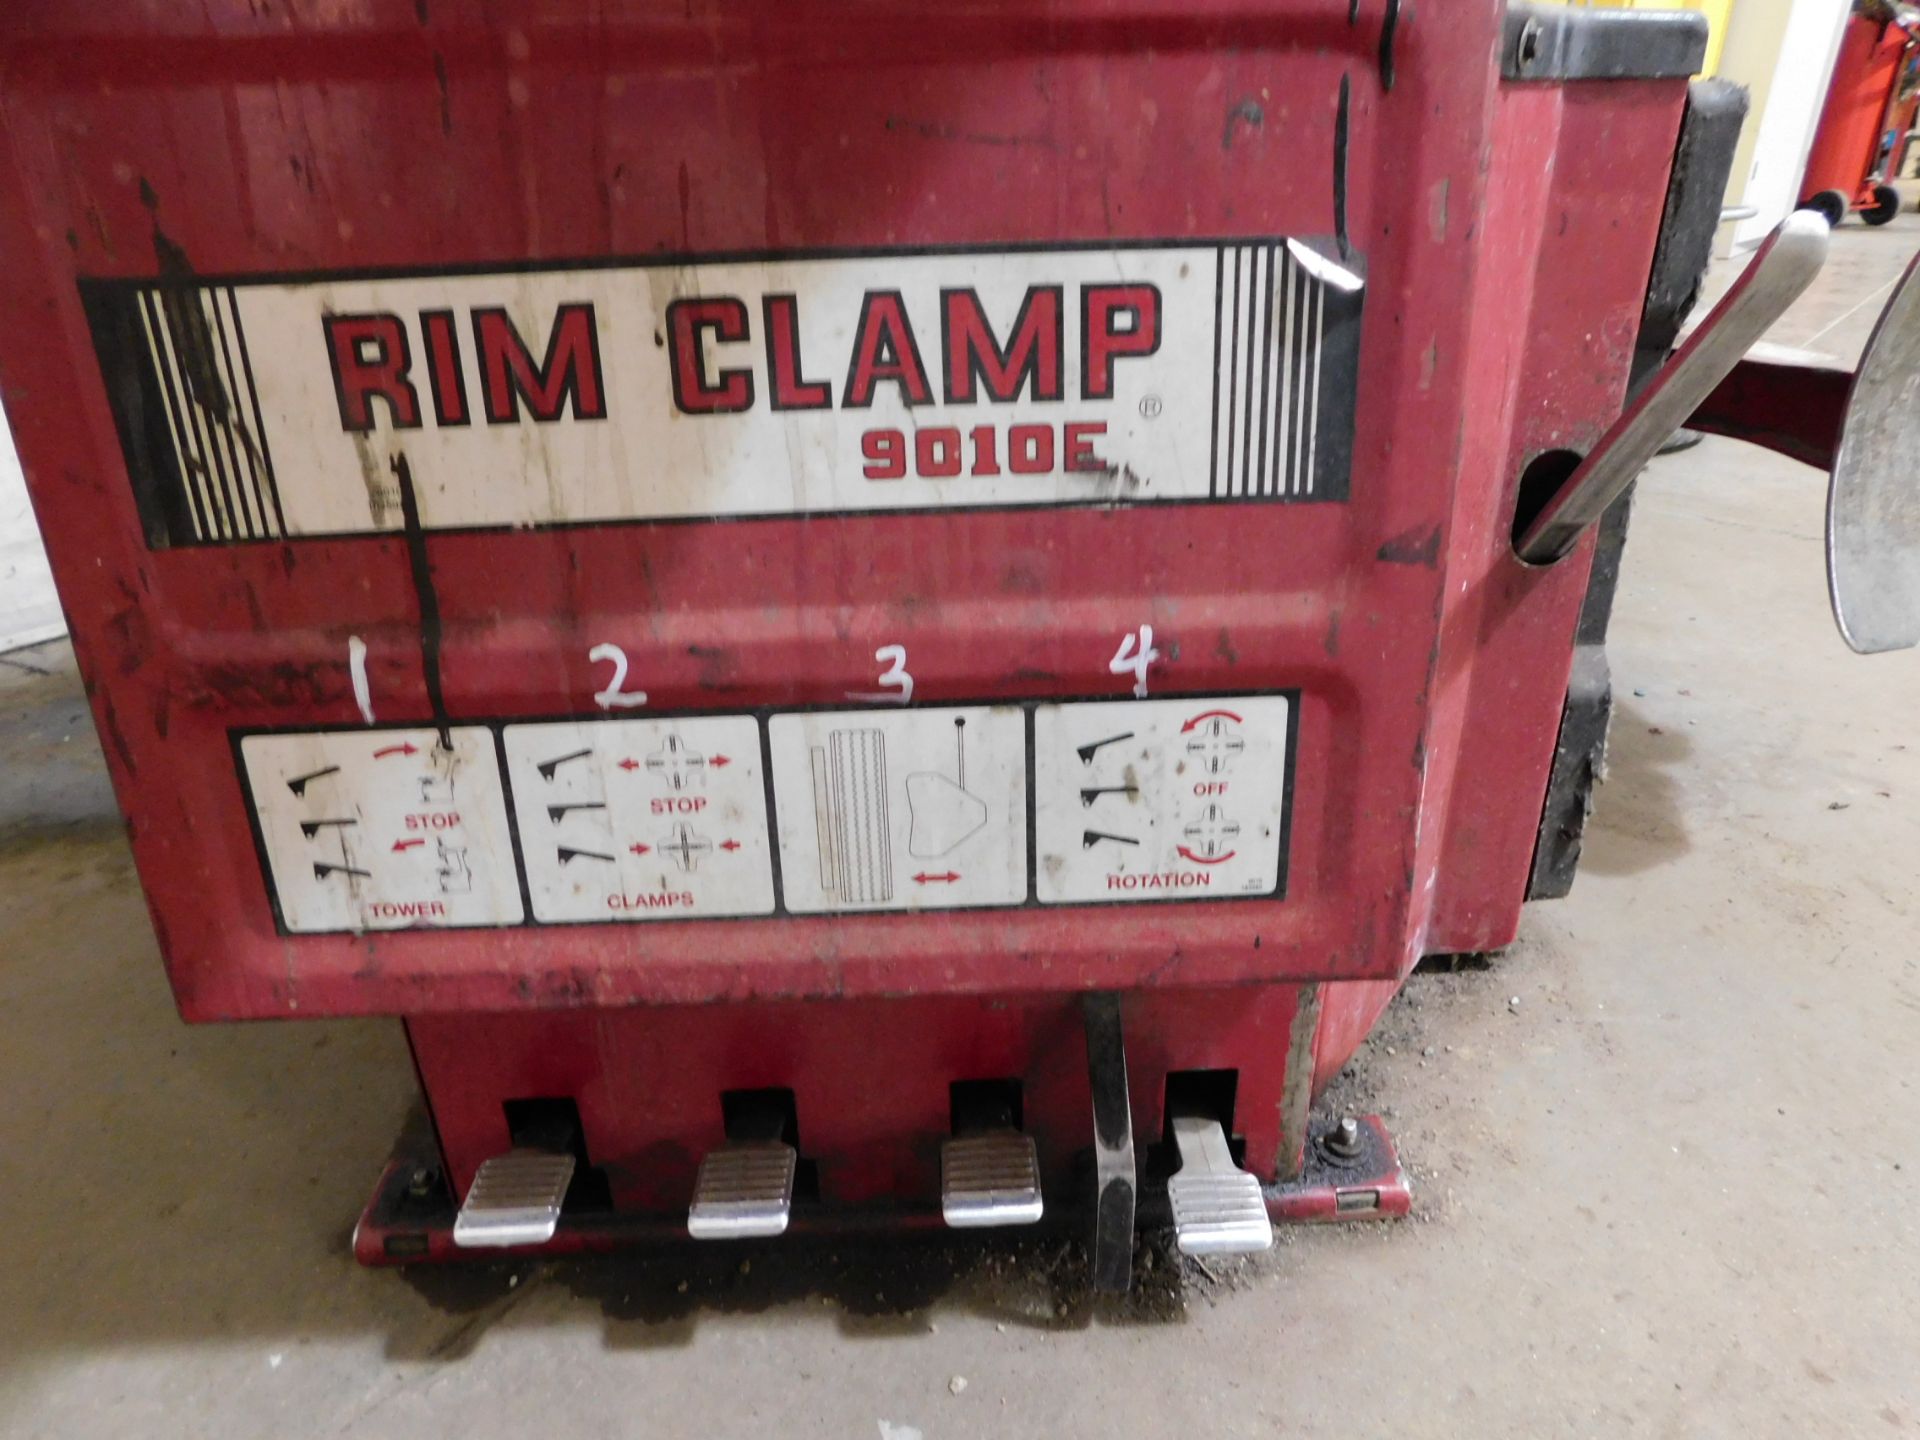 Coats Model 9010E Rim Clamp Tire Changer, SN Unknown - Image 2 of 5